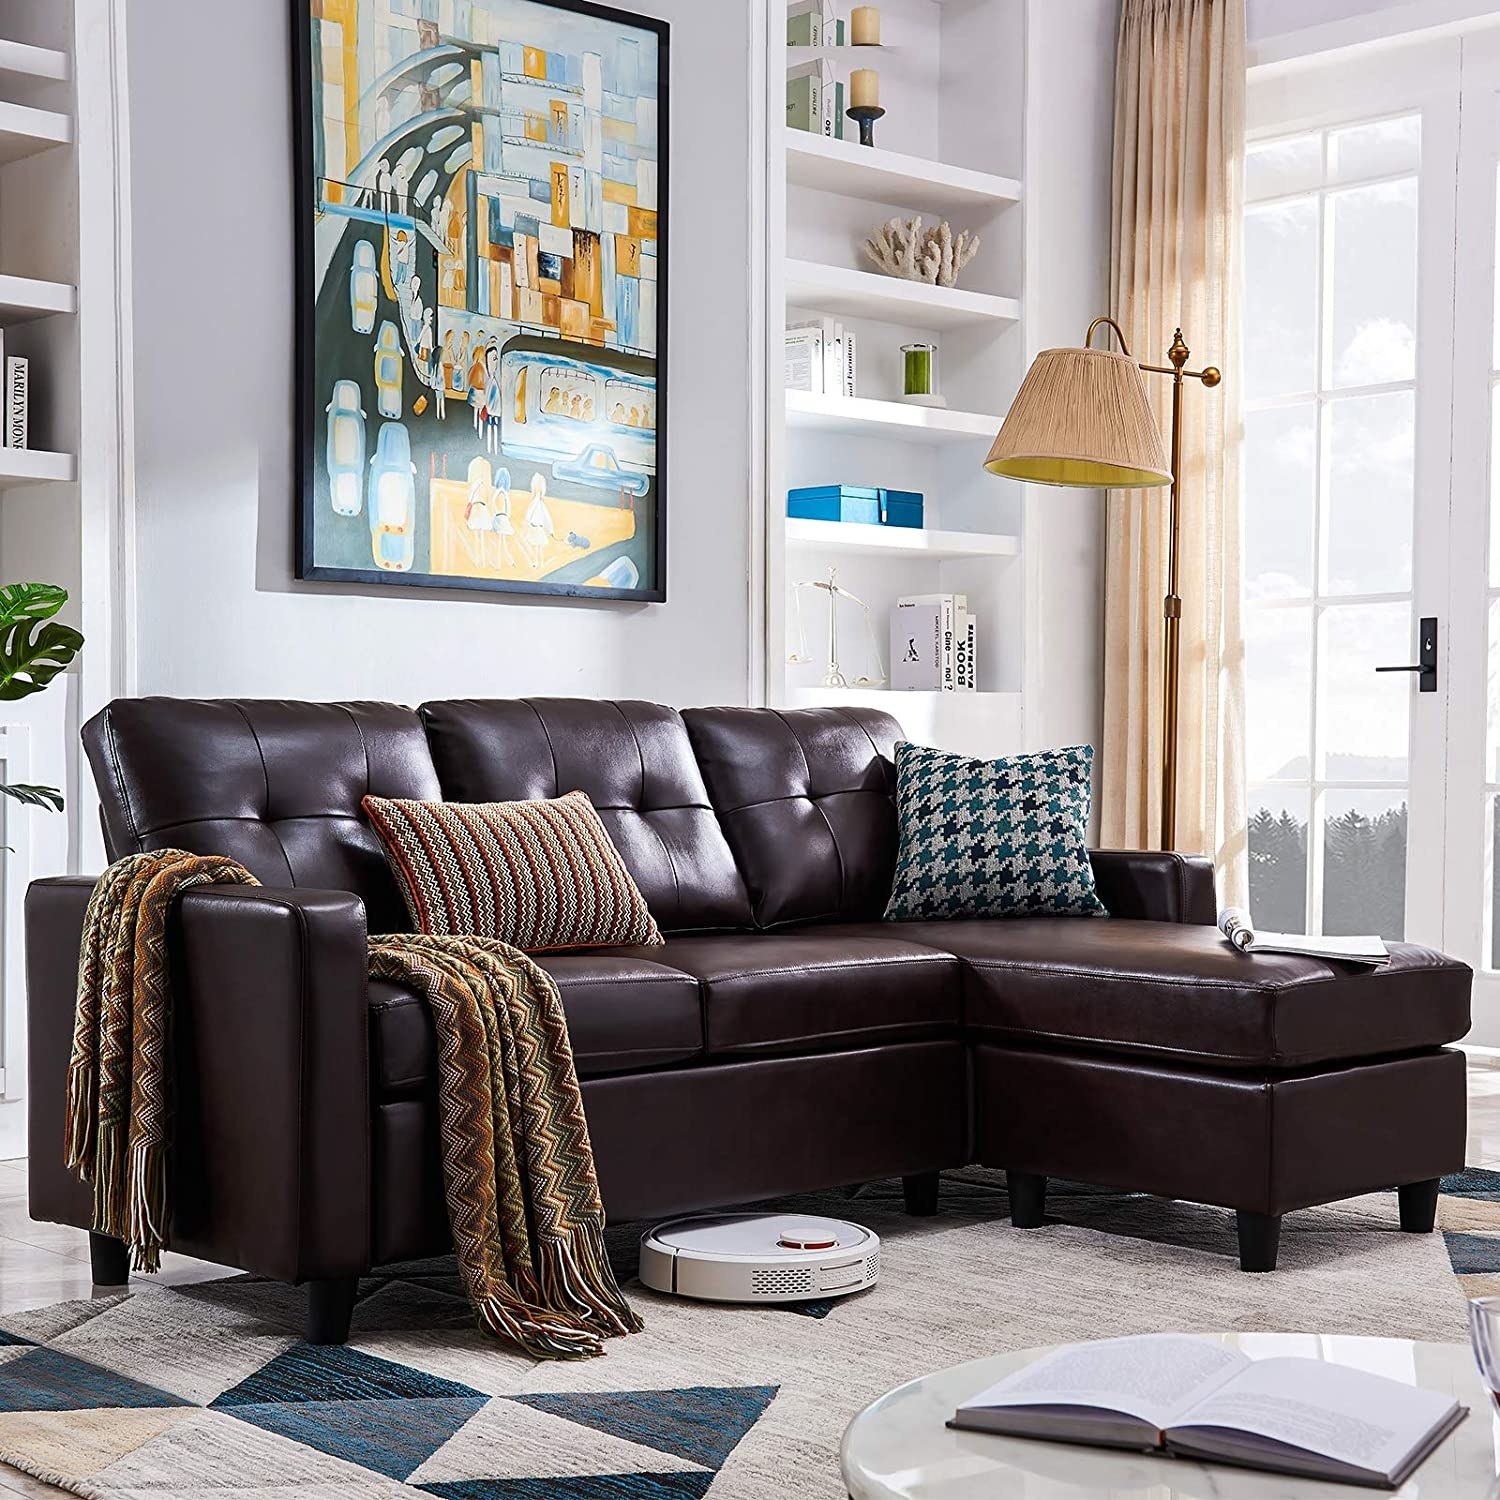 A brown faux leather couch with colorful blankets and pillows